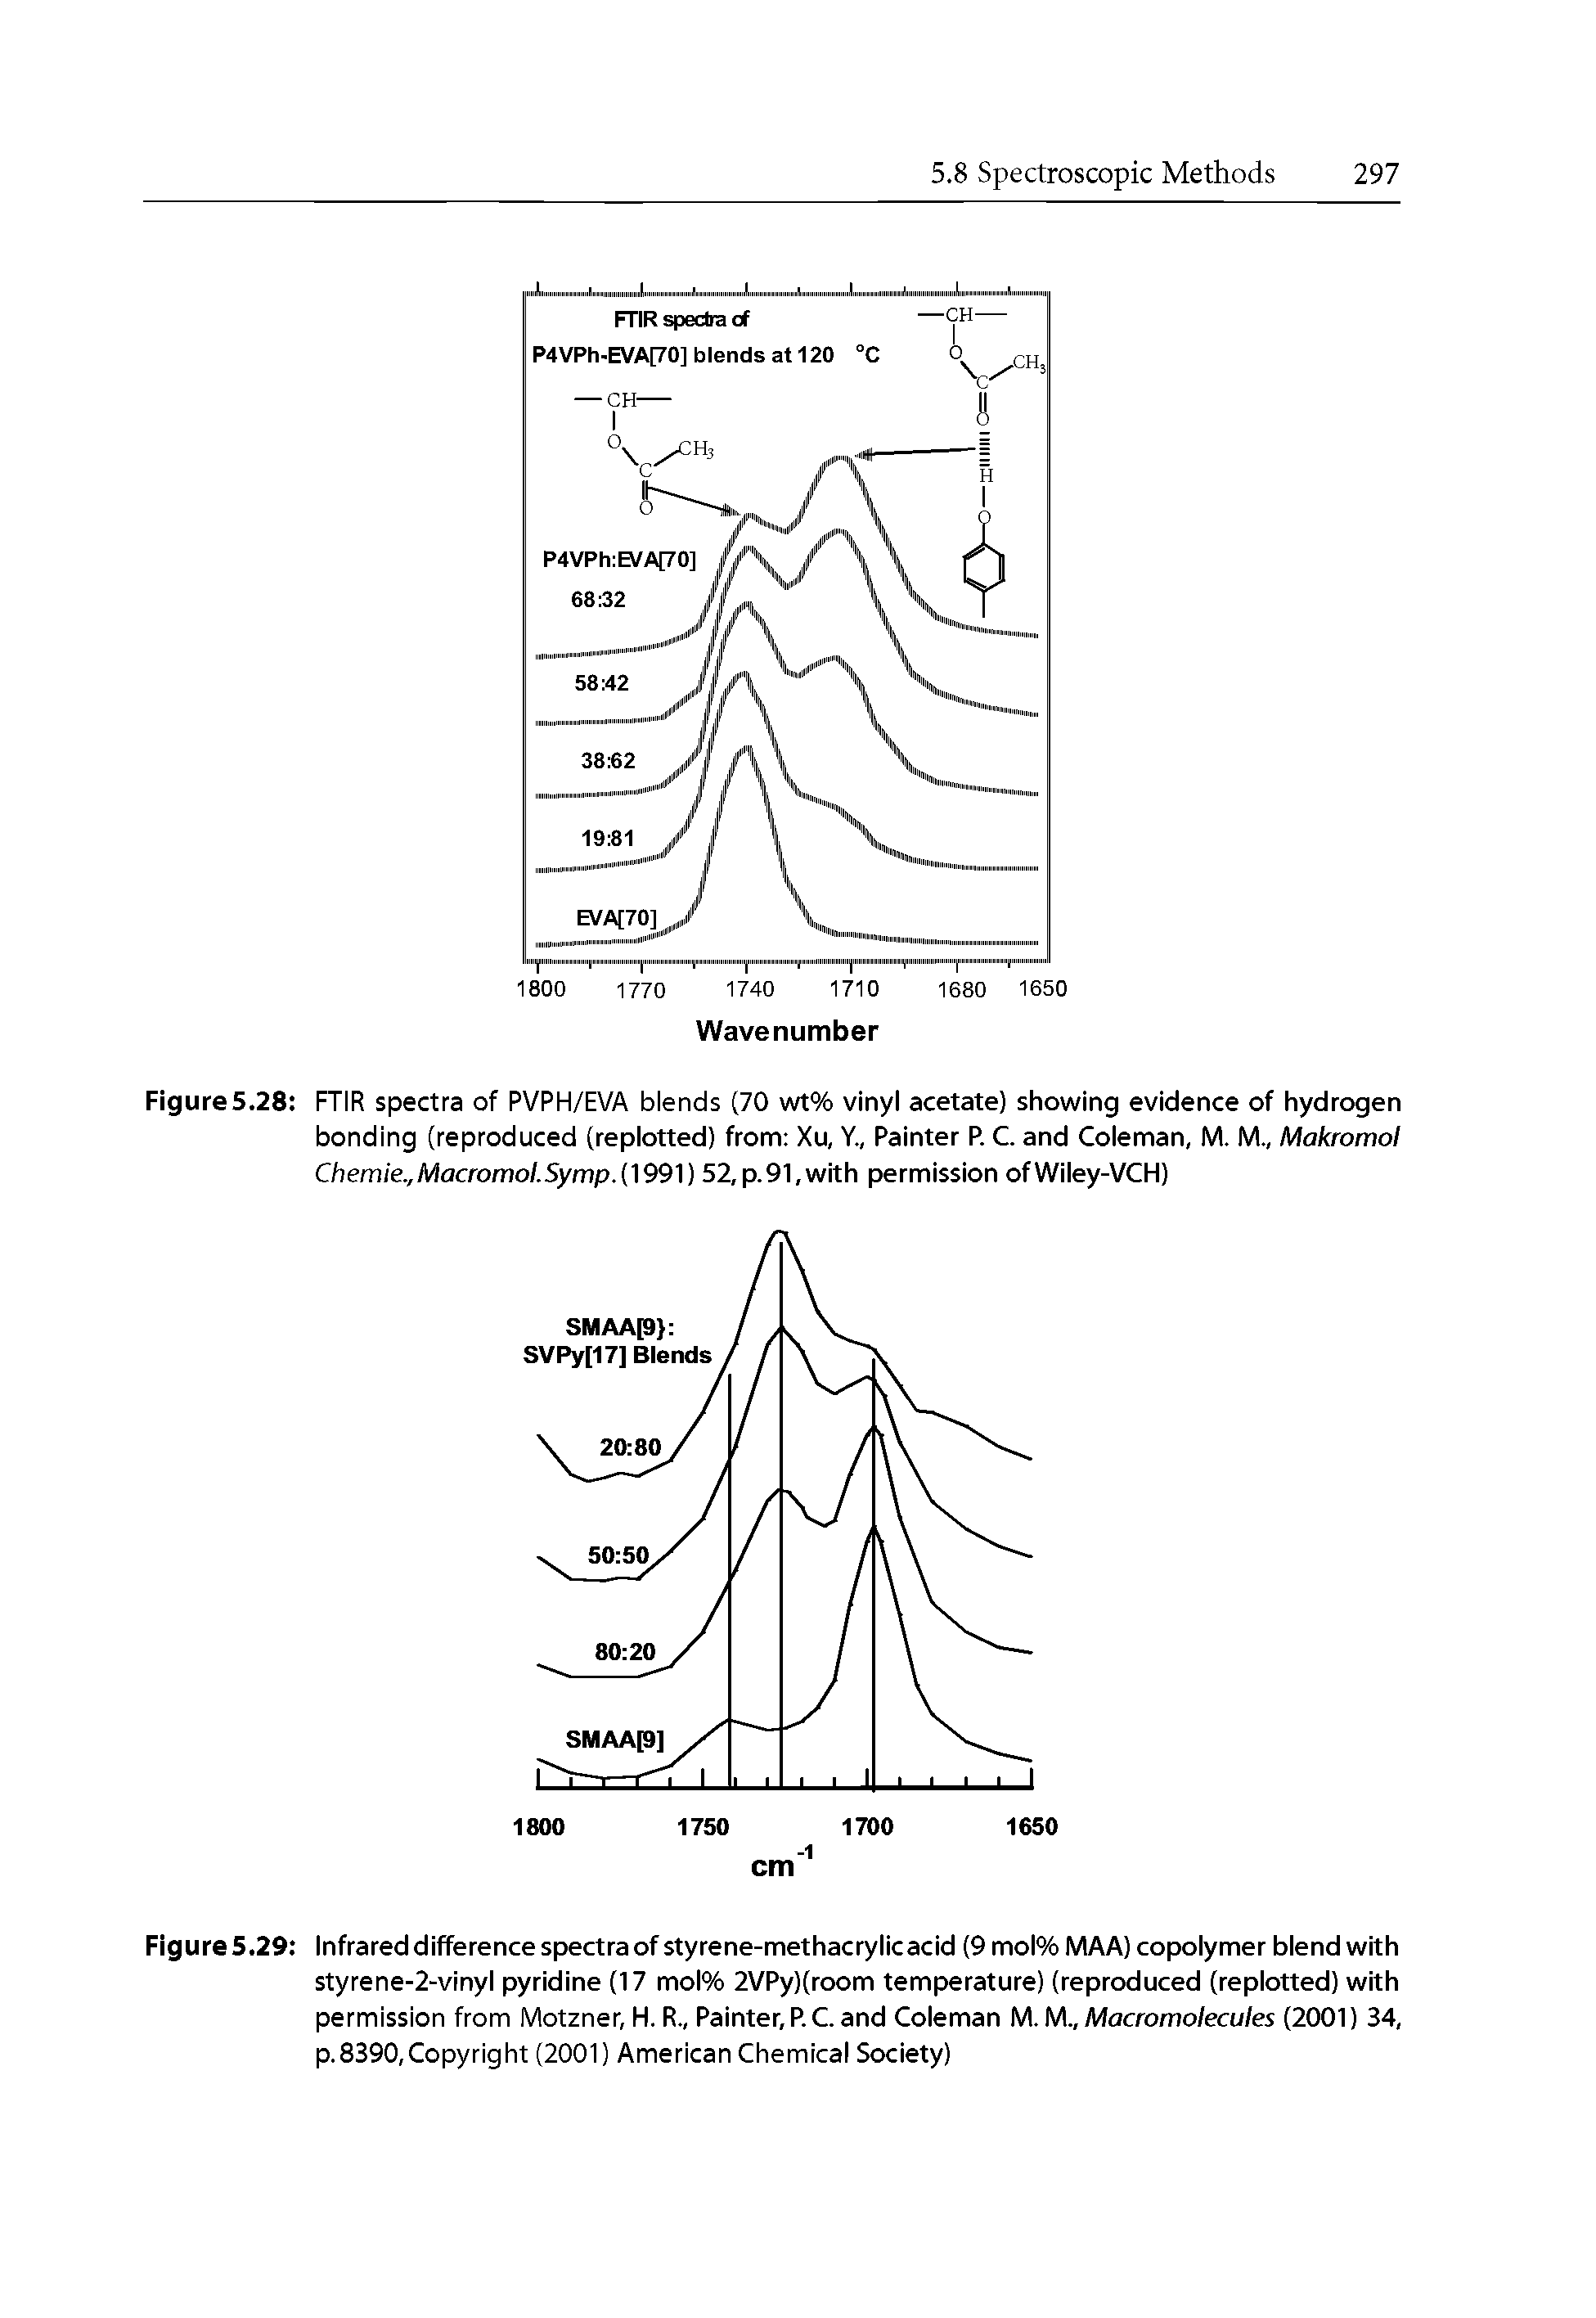 Figure 5.29 Infrared difference spectra of styrene-methacrylicacid (9 mol% MAA) copolymer blend with styrene-2-vinyl pyridine (17 mol% 2VPy)(room temperature) (reproduced (replotted) with permission from Motzner, H. R., Painter, P. C. and Coleman M.M., Macromolecules (2001) 34, p.8390,Copyright (2001) American Chemical Society)...